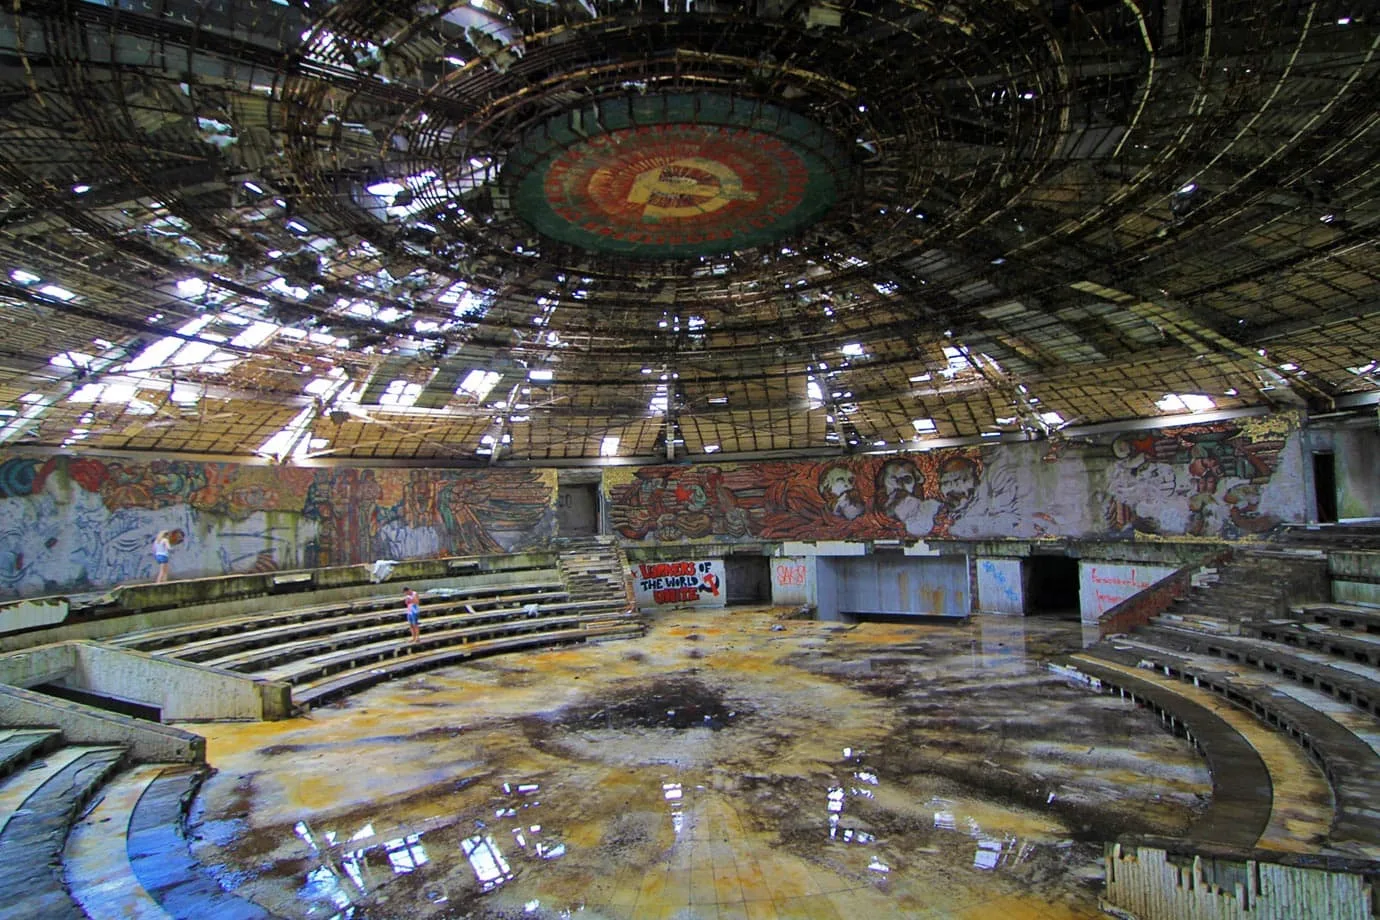 The main auditorium, much like the rest of Buzludzha, is in complete disrepair with rubble and glass on the floor